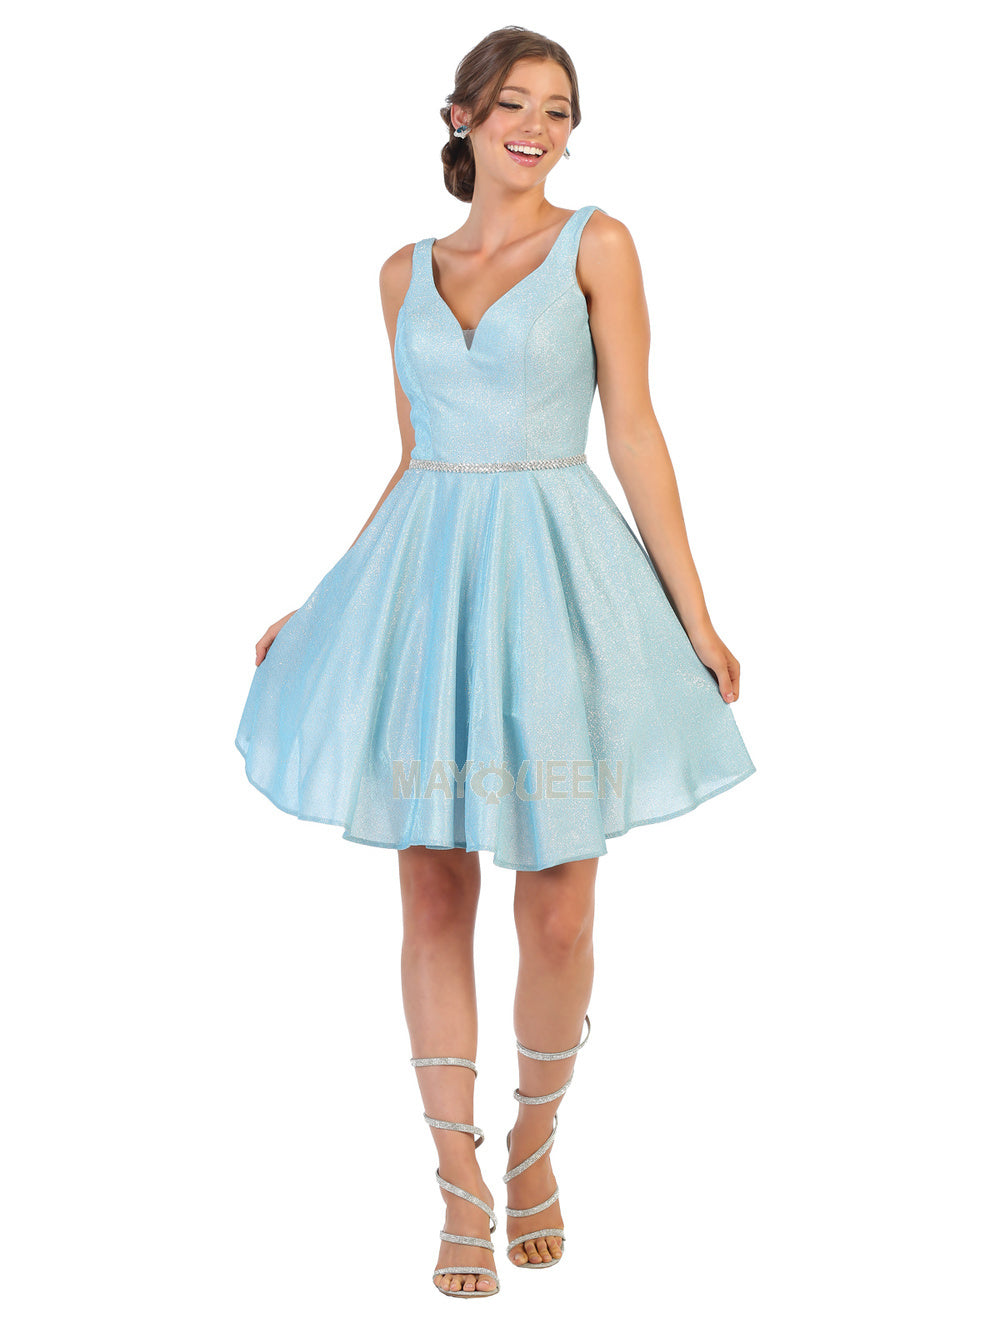 MQ 1777 - Metallic Tank Style A-Line Homecoming Dress with Beaded Belt & Pockets Homecoming Mayqueen 2 BABY BLUE 